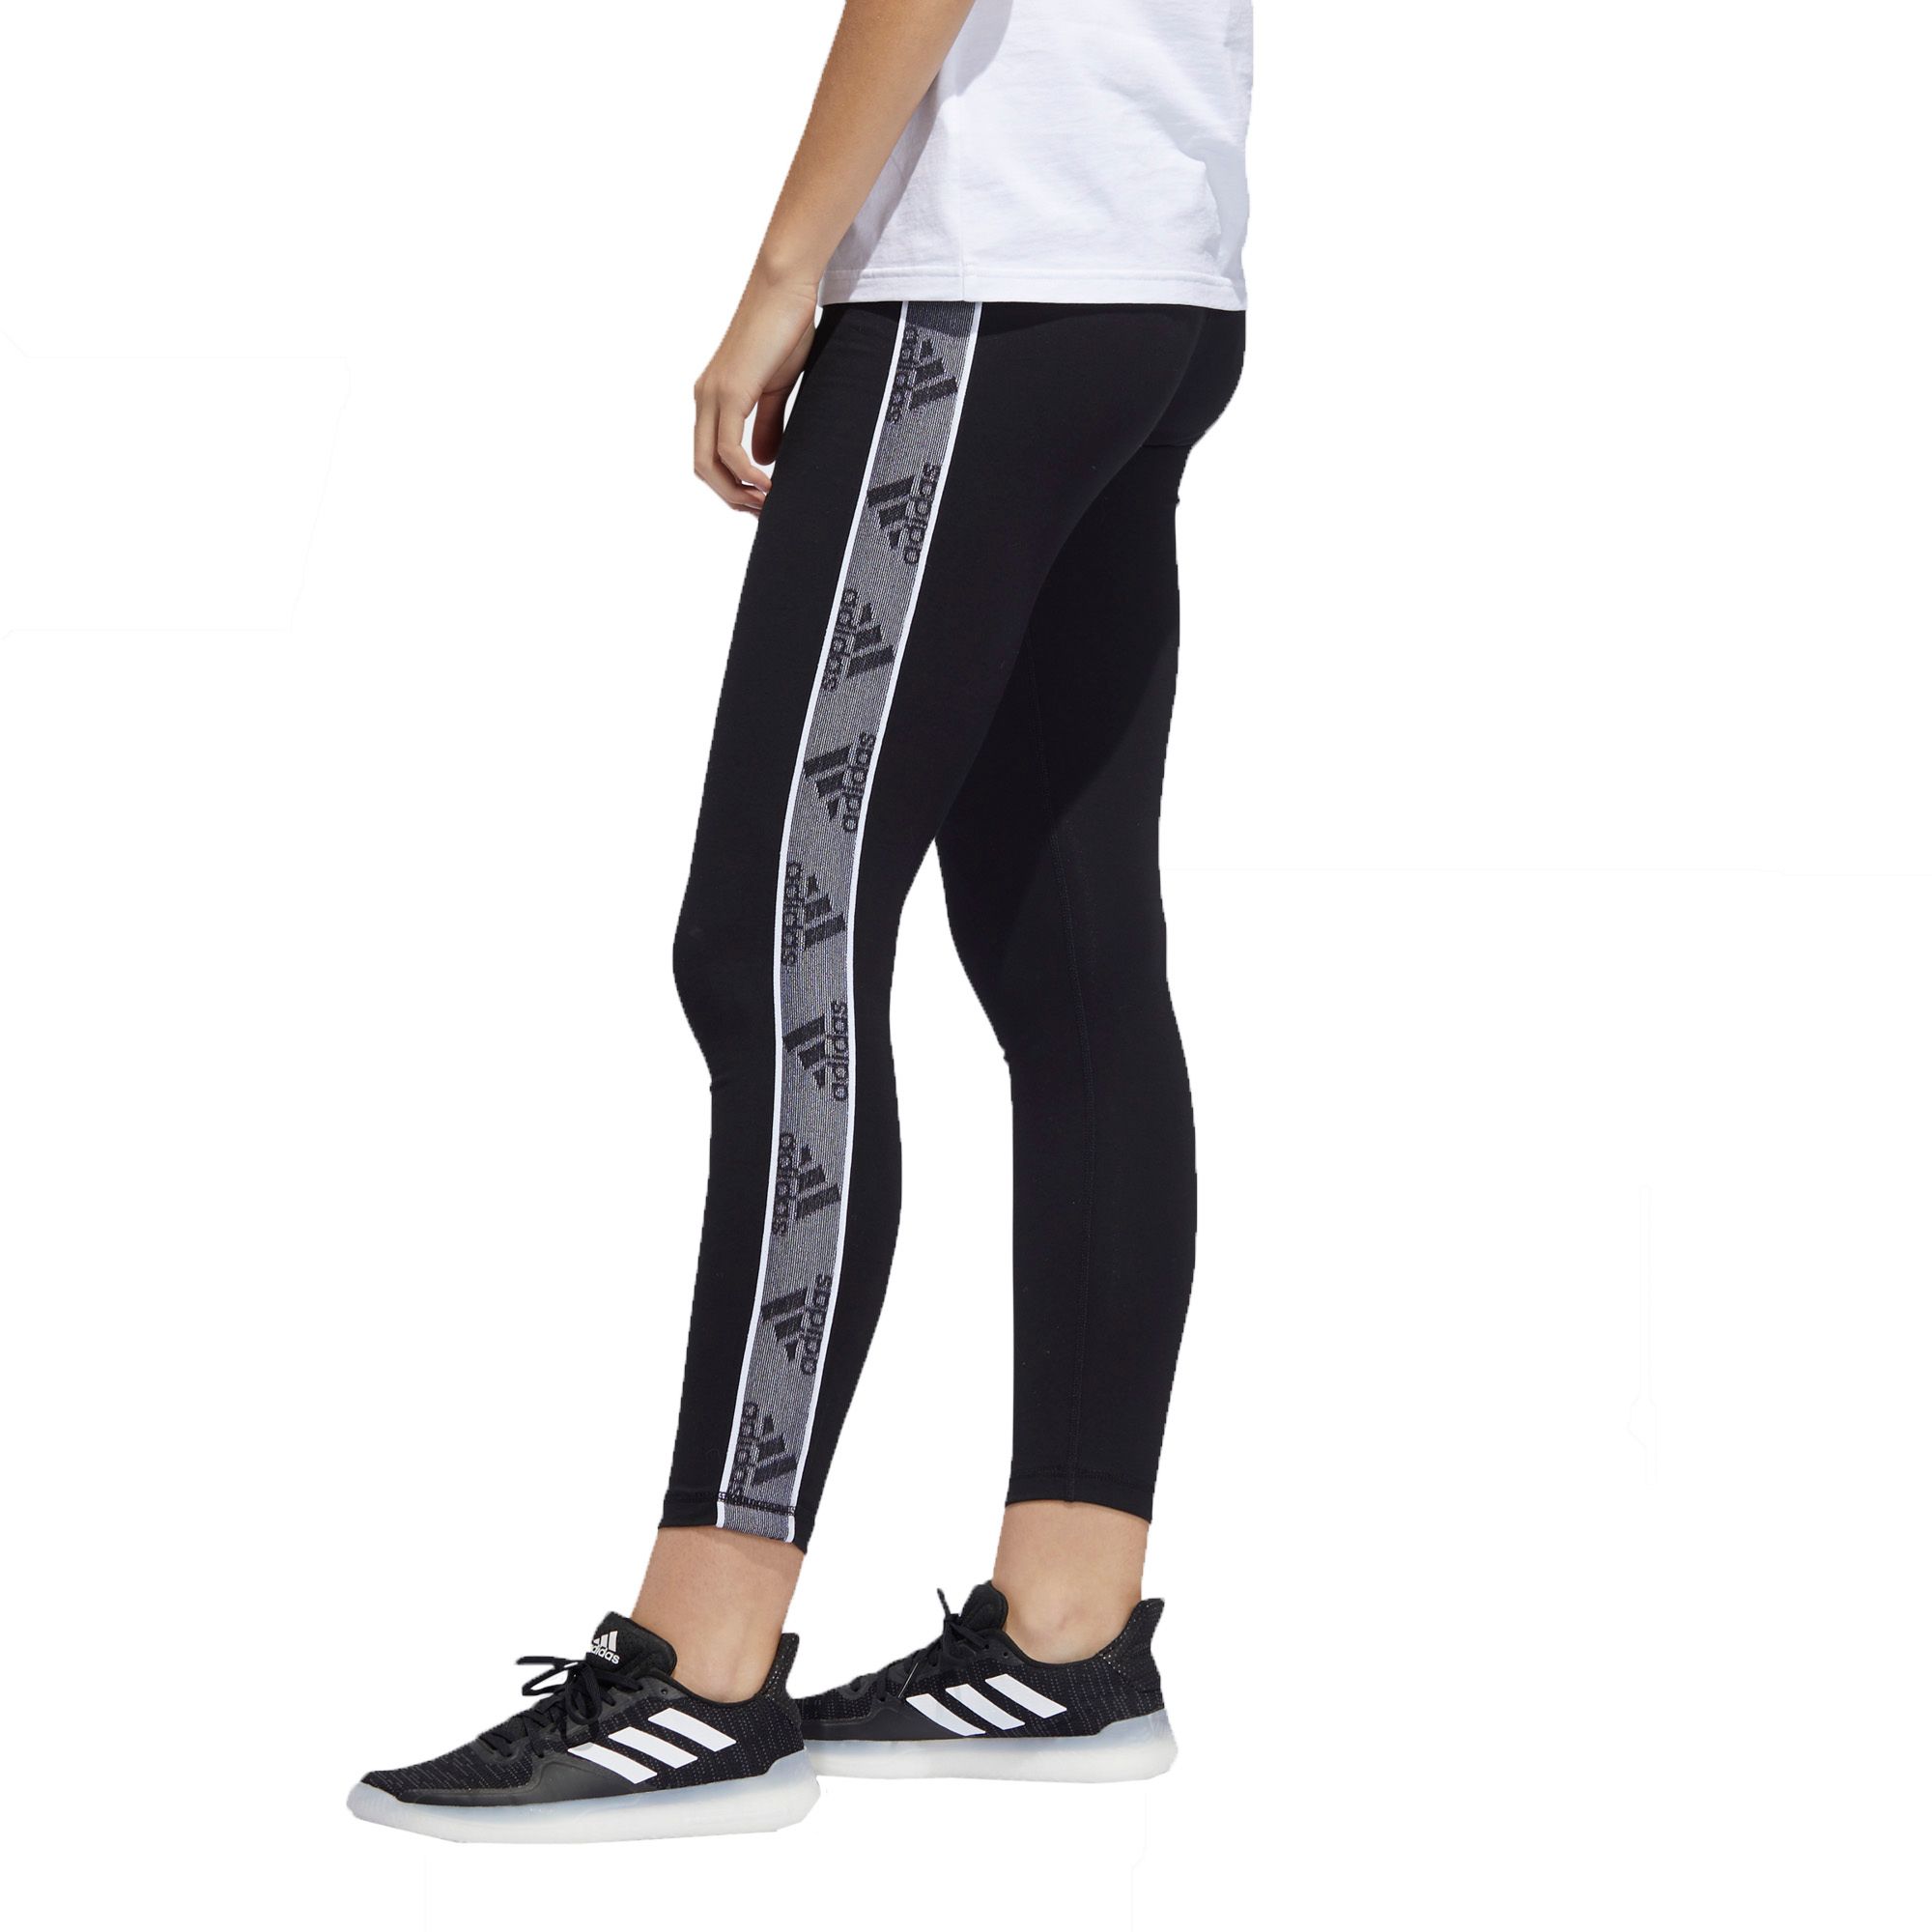 adidas changeover pant